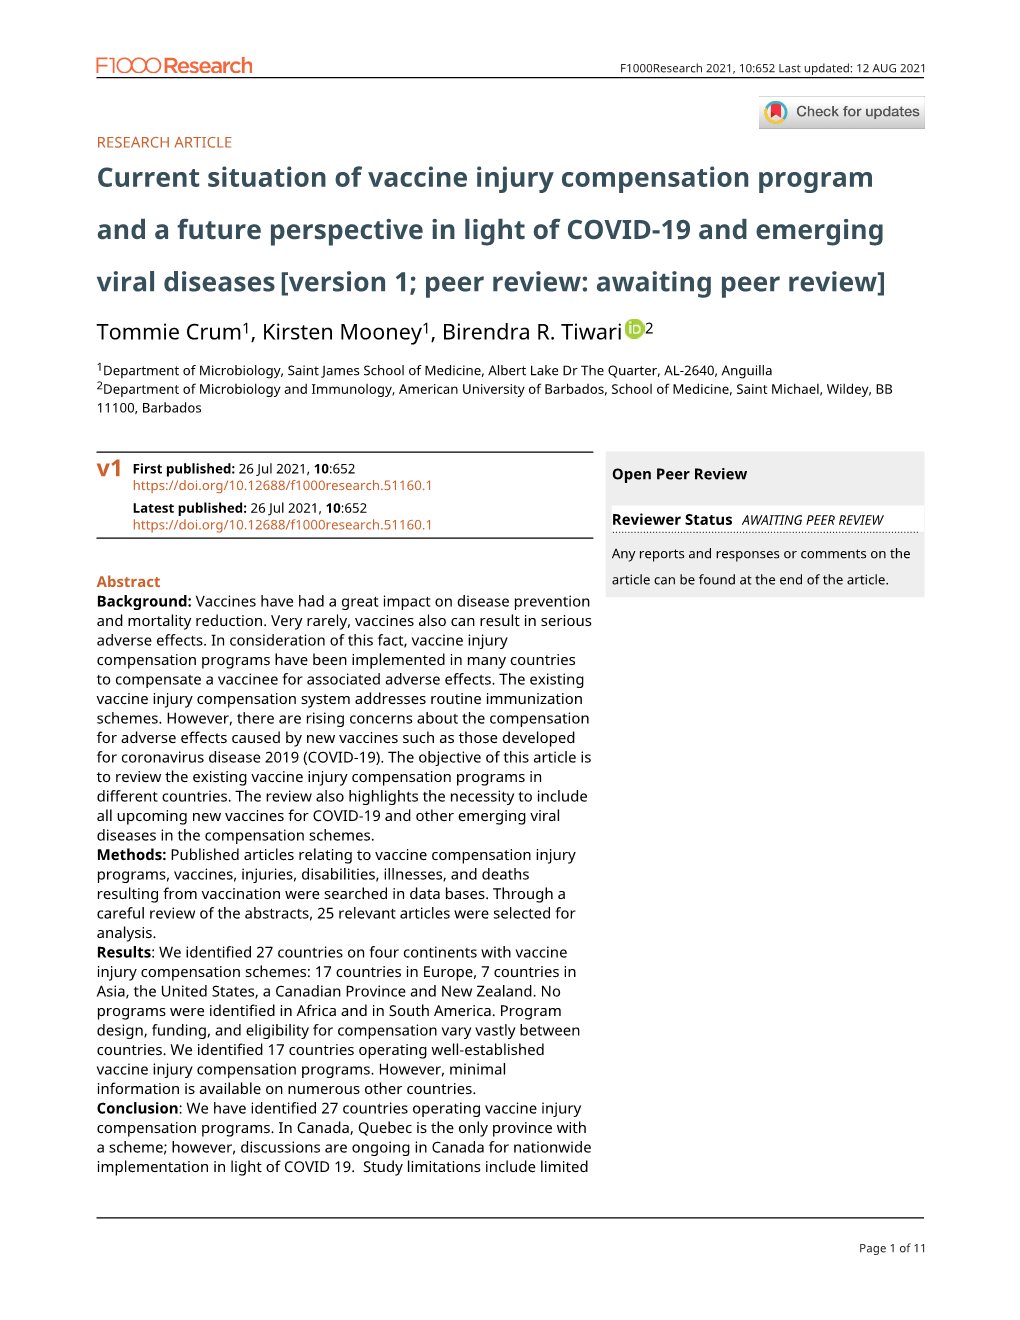 Current Situation of Vaccine Injury Compensation Program and a Future